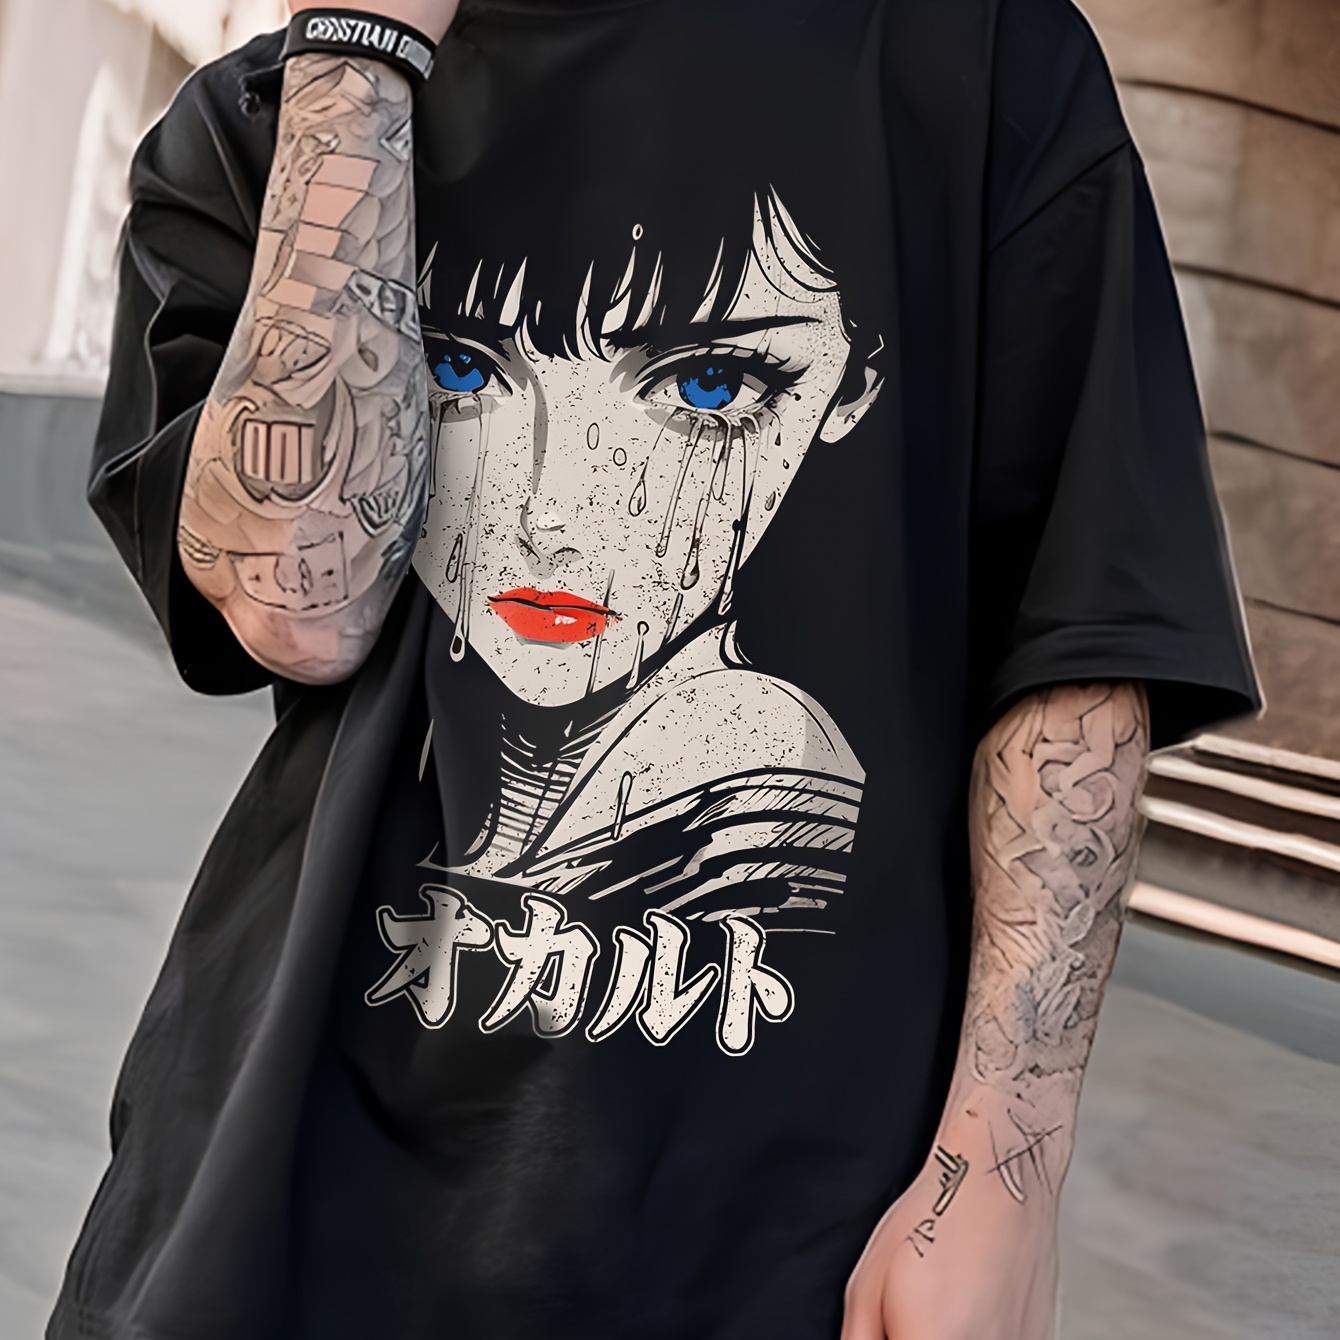 

Anime Girl Print, Men's Round Crew Neck Short Sleeve, Simple Style Tee Fashion Regular Fit T-shirt, Casual Comfy Breathable Top For Spring Summer Holiday Leisure Vacation Men's Clothing As Gift